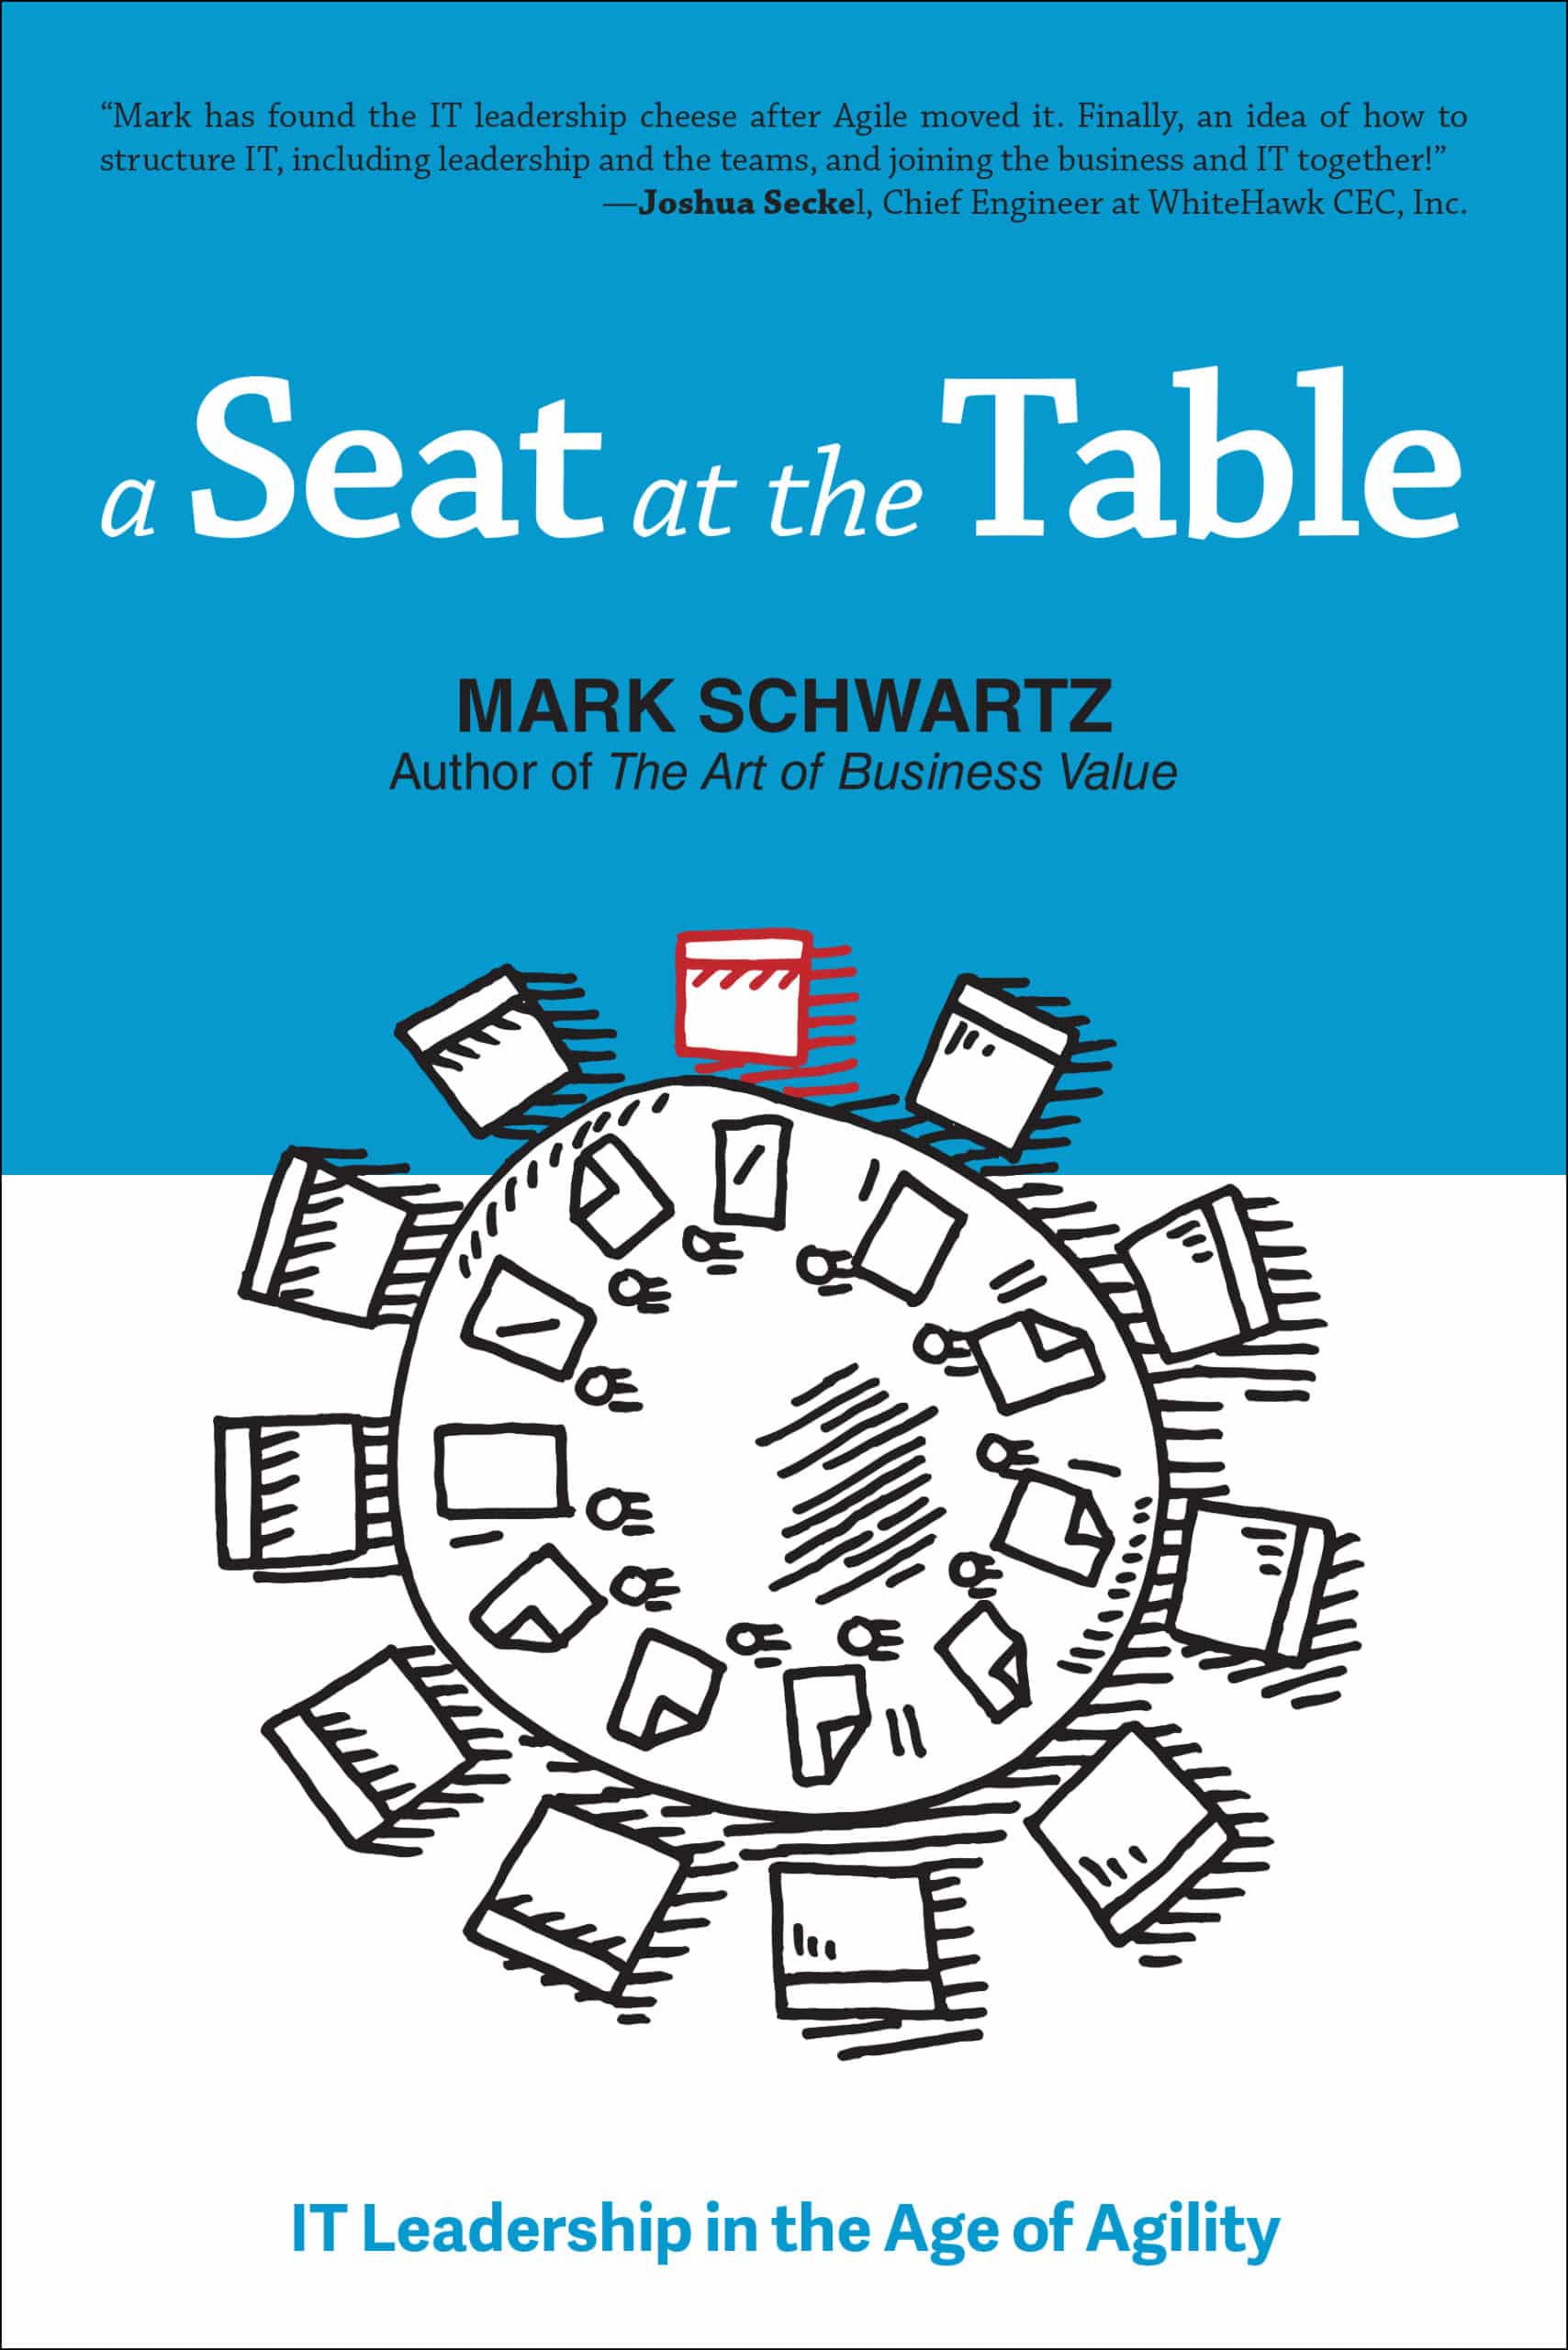 Cover of A Seat at the Table: IT Leadership in the Age of Agility by Mark Schwartz, where we look at enterprise architecture in an Agile context